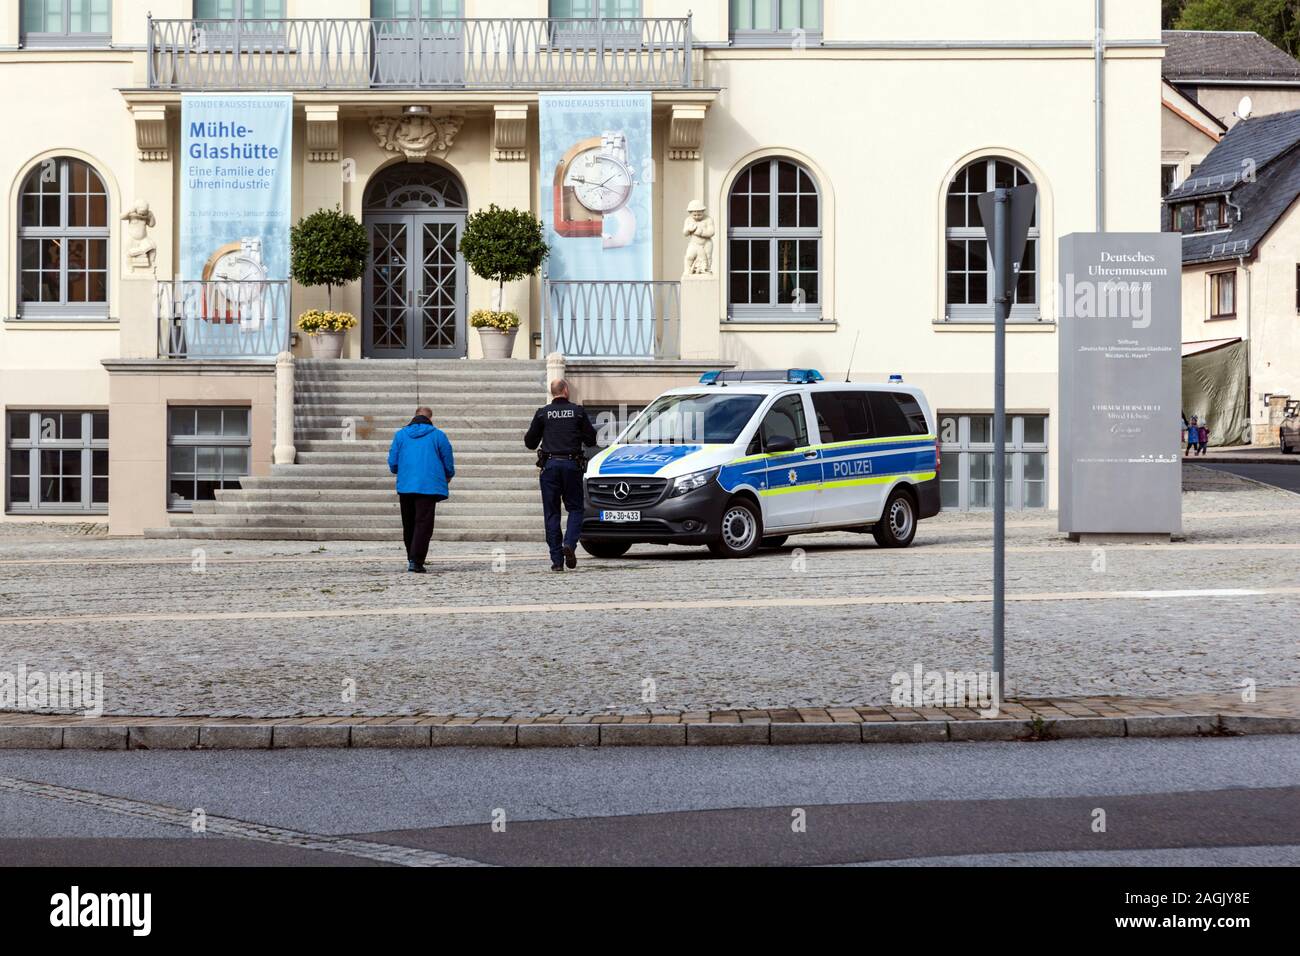 Police at the German Watch Museum Glashütte Stock Photo